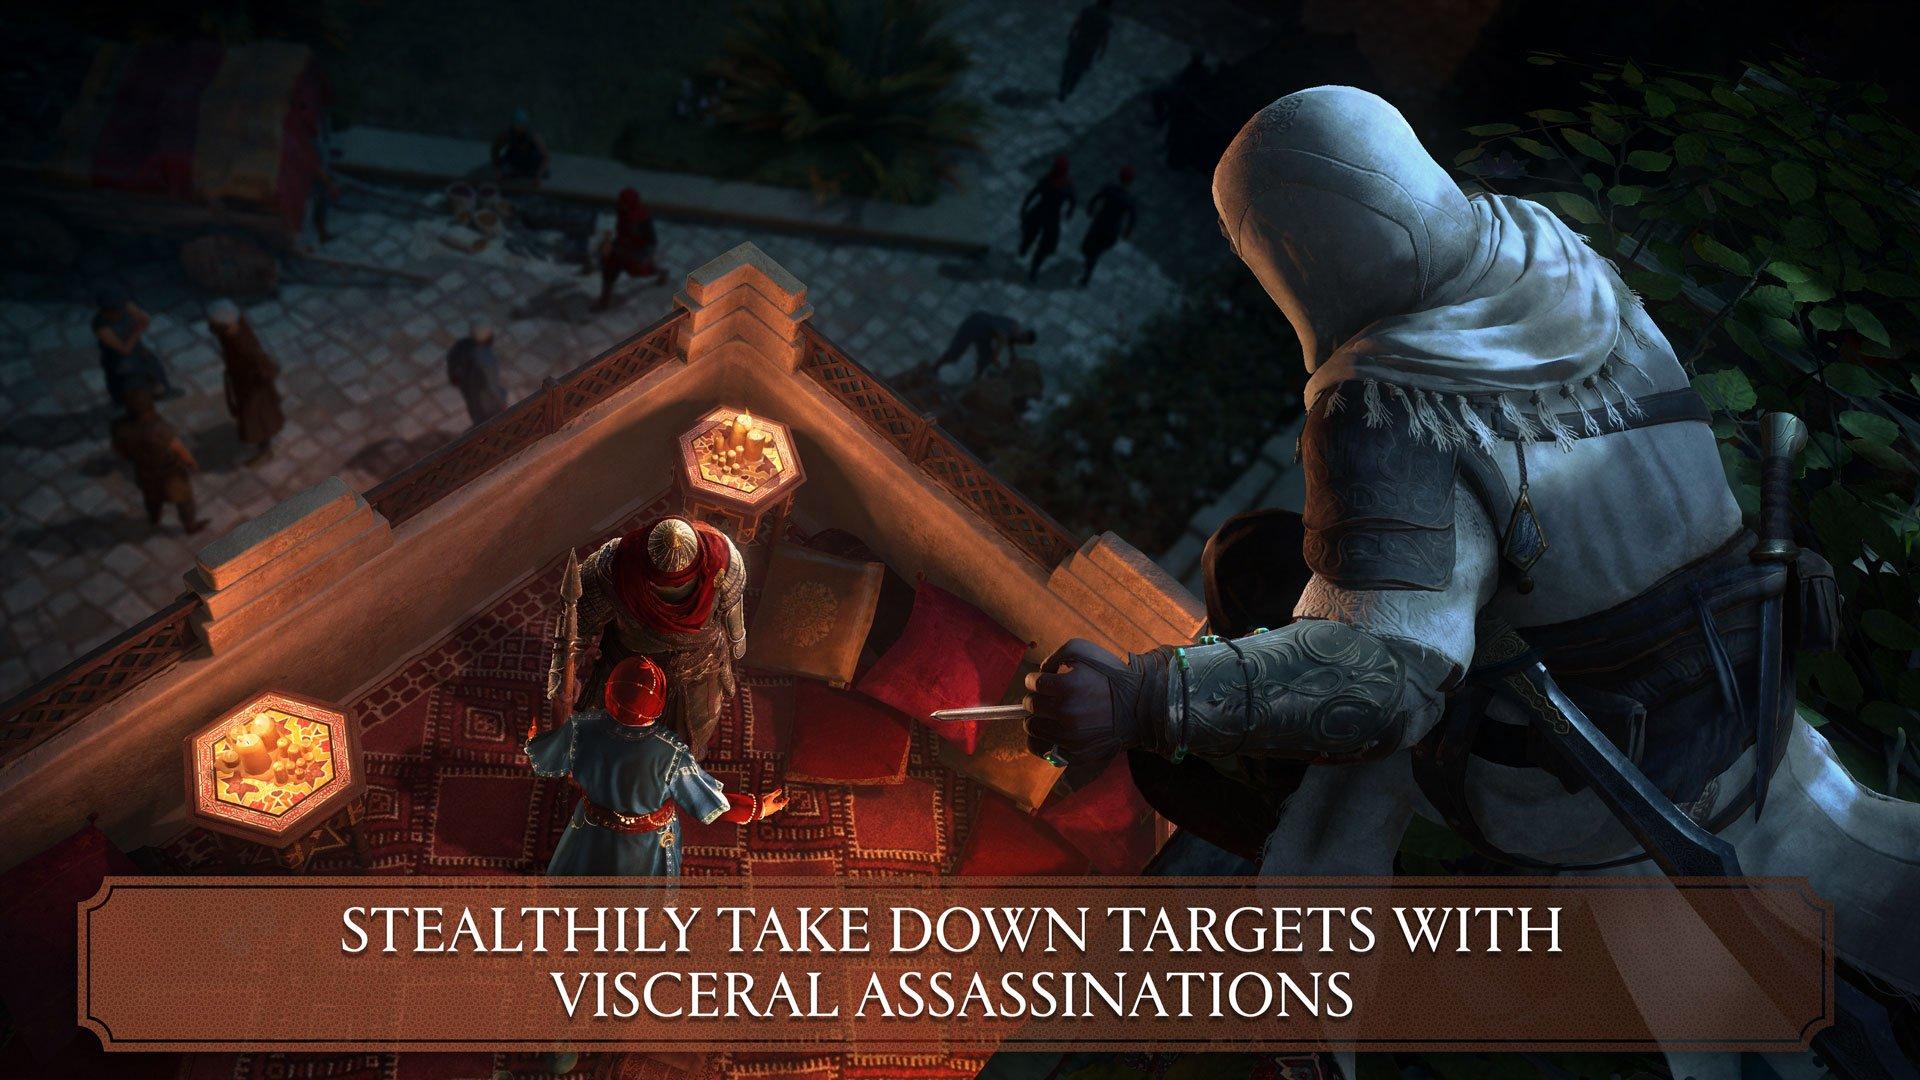 Games] Assassin's Creed 3 Minimum Requirements Revealed - Less Wires